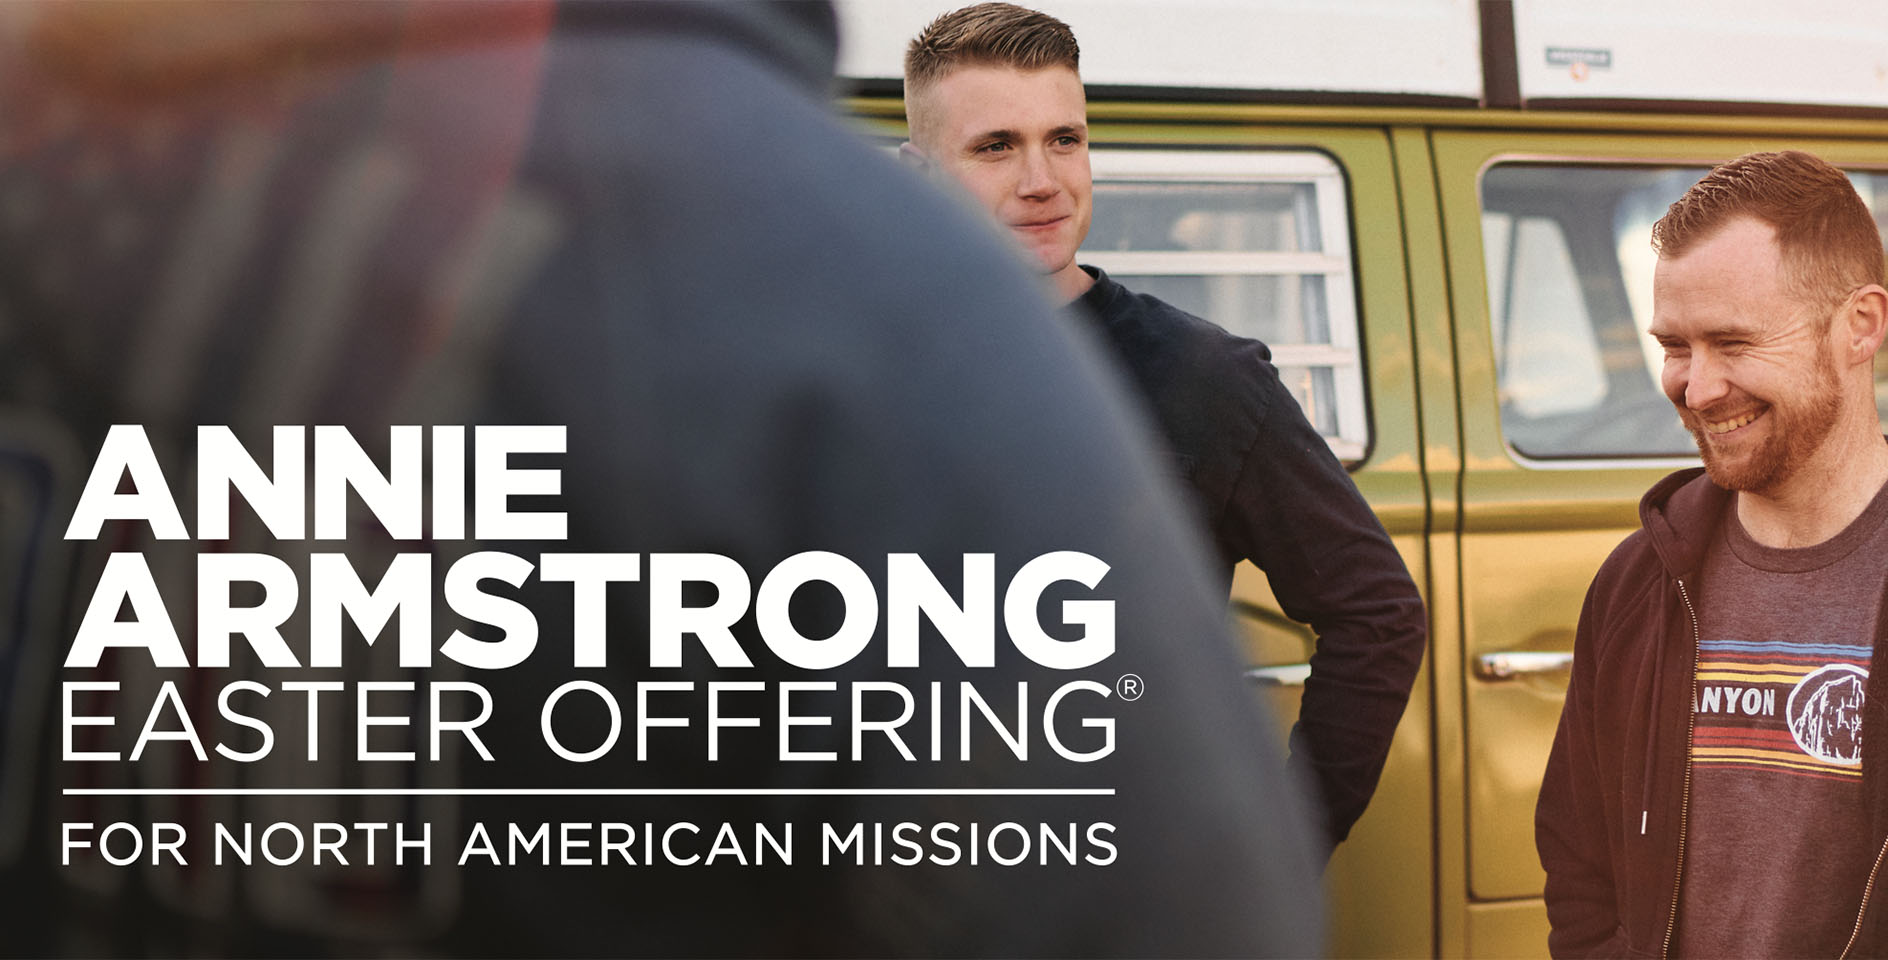 5 facts about Annie Armstrong and the Easter Offering ERLC